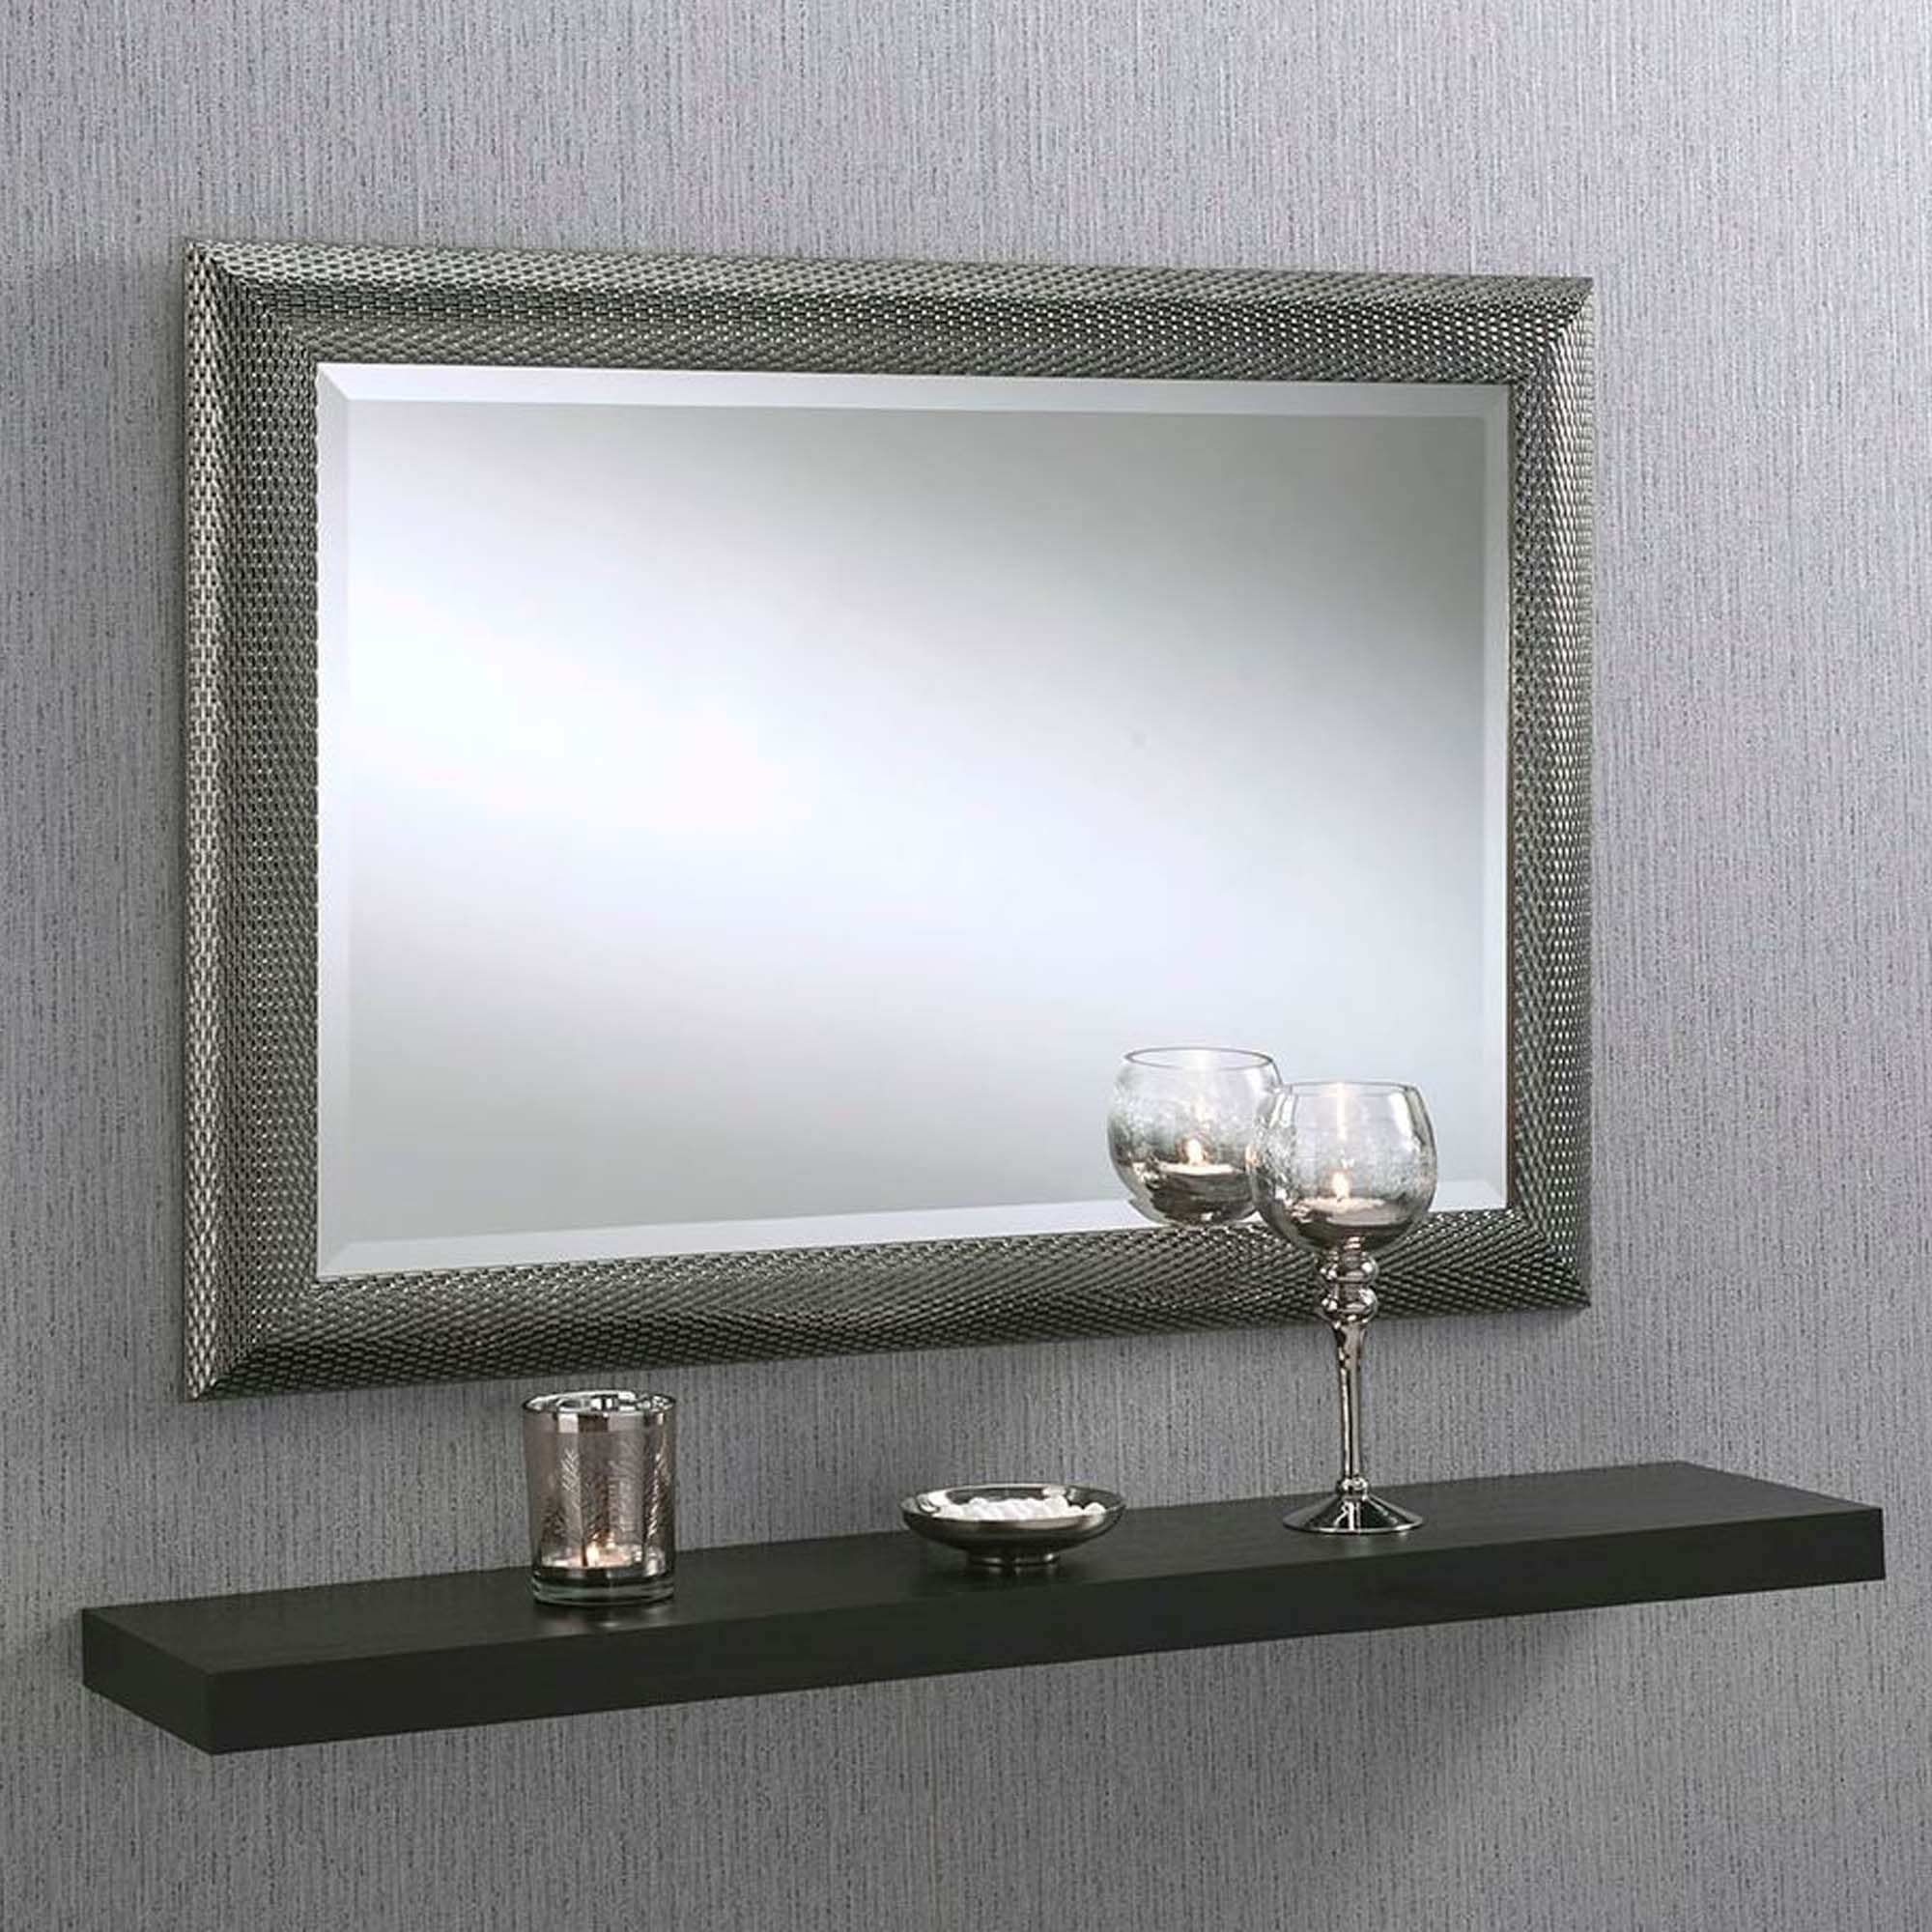 Dimple Effect Grey Rectangular Wall Mirror | Homesdirect365 Regarding Wall Mirrors (View 7 of 15)